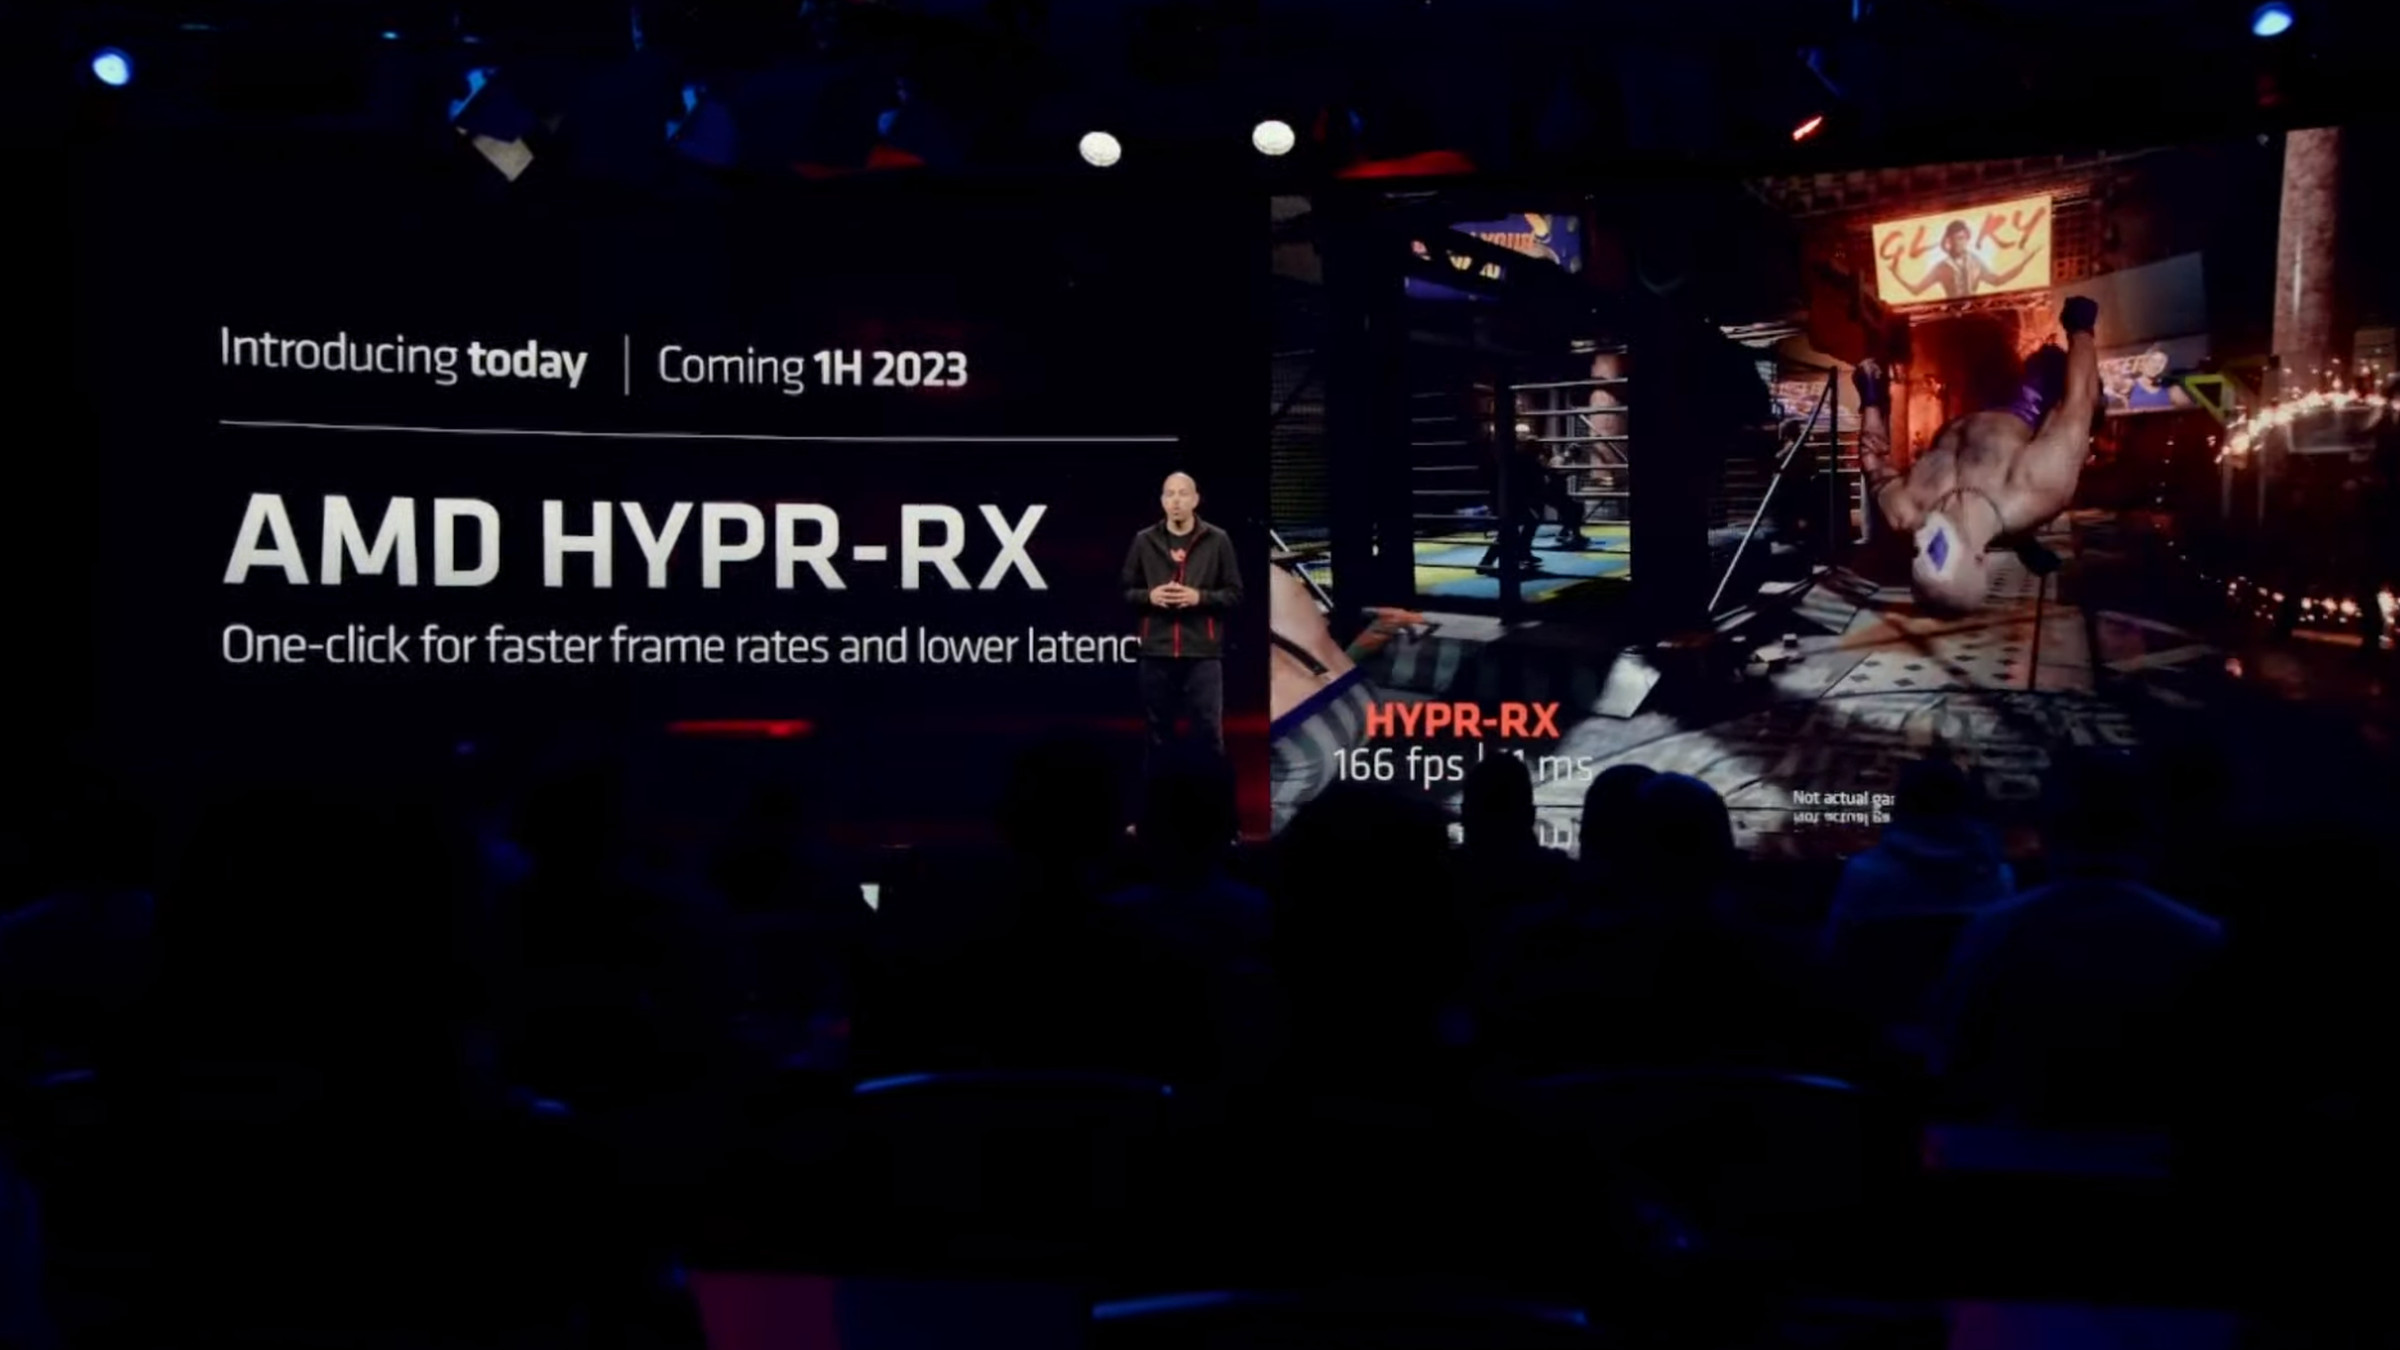 Screenshot of AMD’s slide for its Hypr-RX feature.